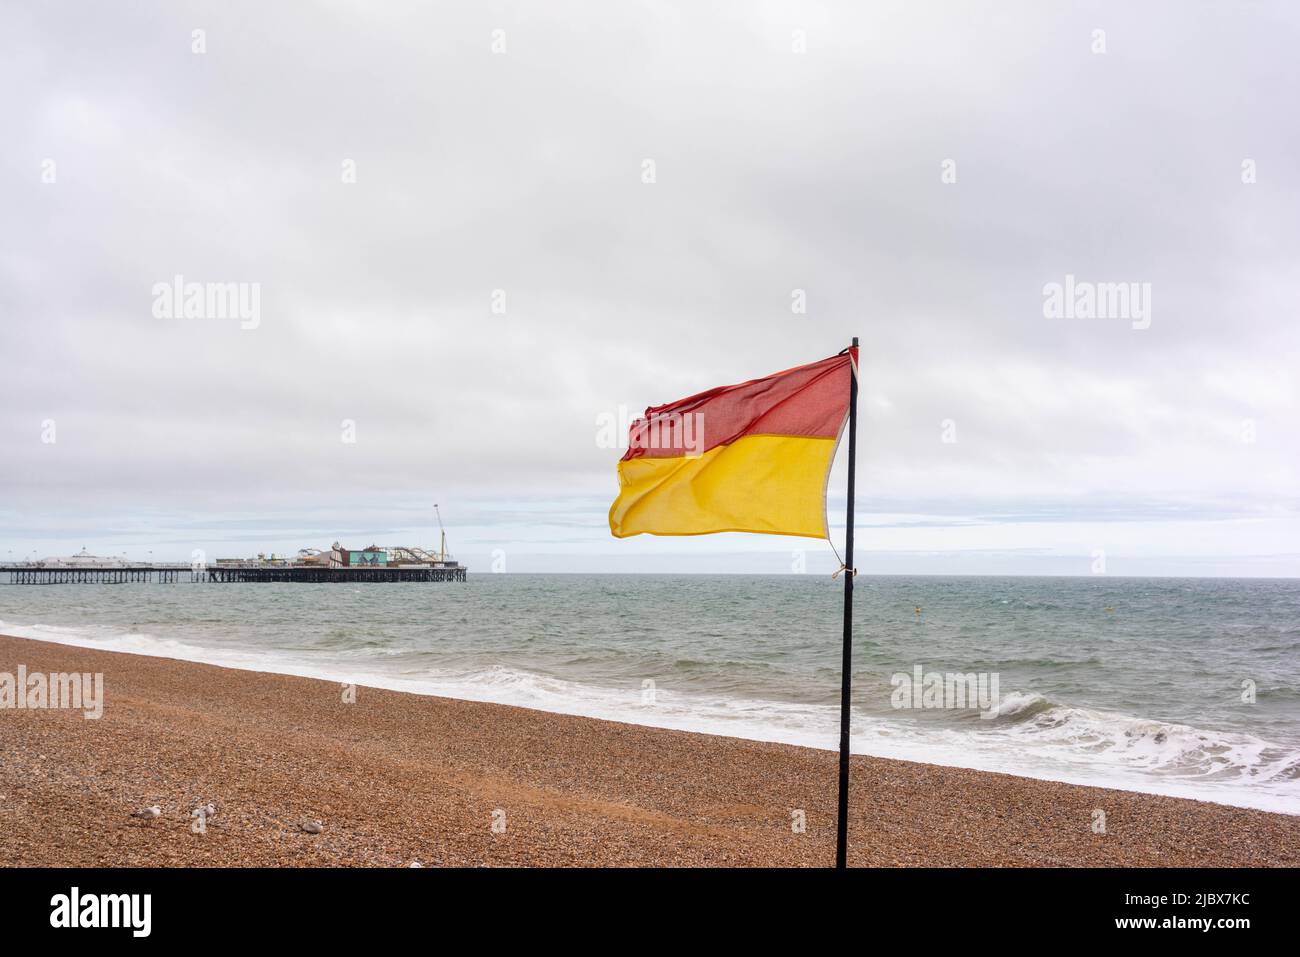 Red and yellow lifeguards on duty flag at Brighton beach with the Brighton Pier in the background on an overcast day, East Sussex, England, UK Stock Photo